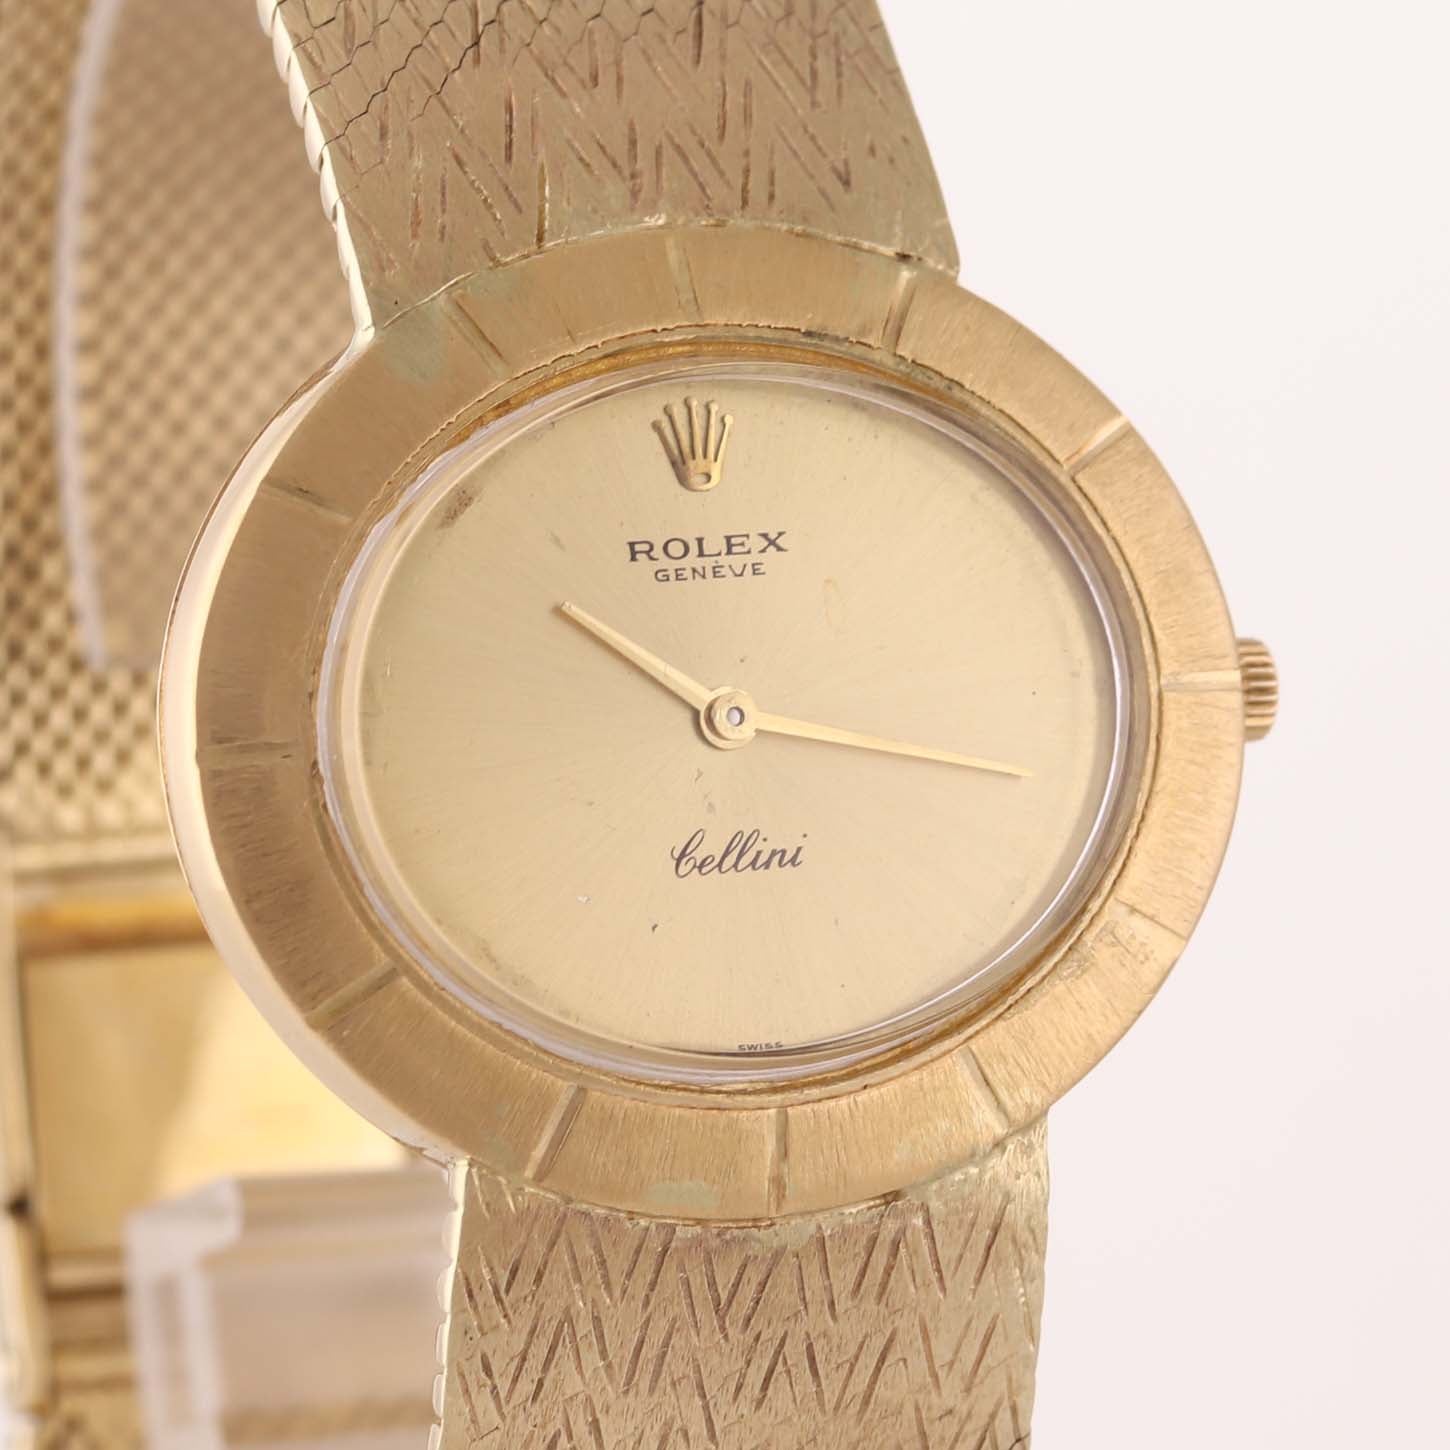 Ladies Vintage Rolex Geneve Cellini 14k Yellow Gold 33mm Champagne Dial Watch